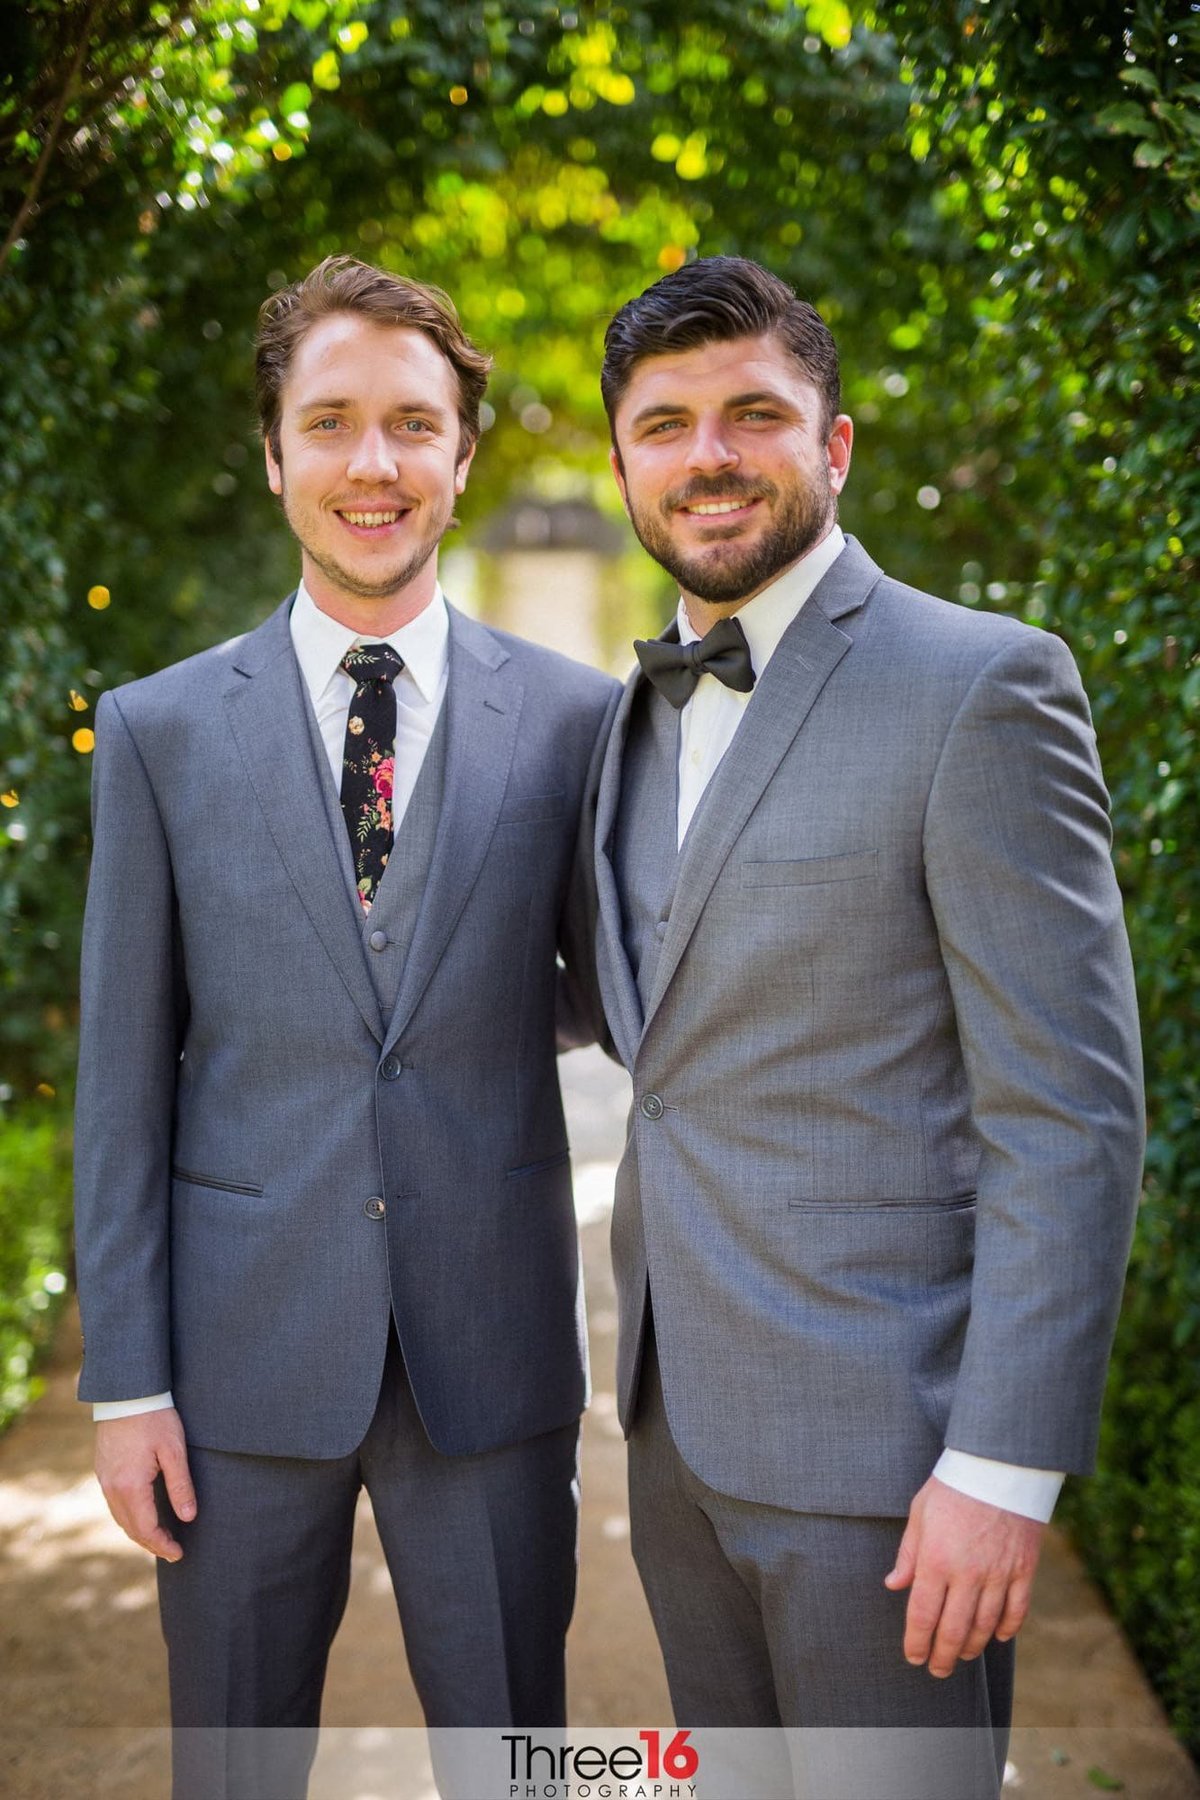 Groom poses with a Groomsman for photos